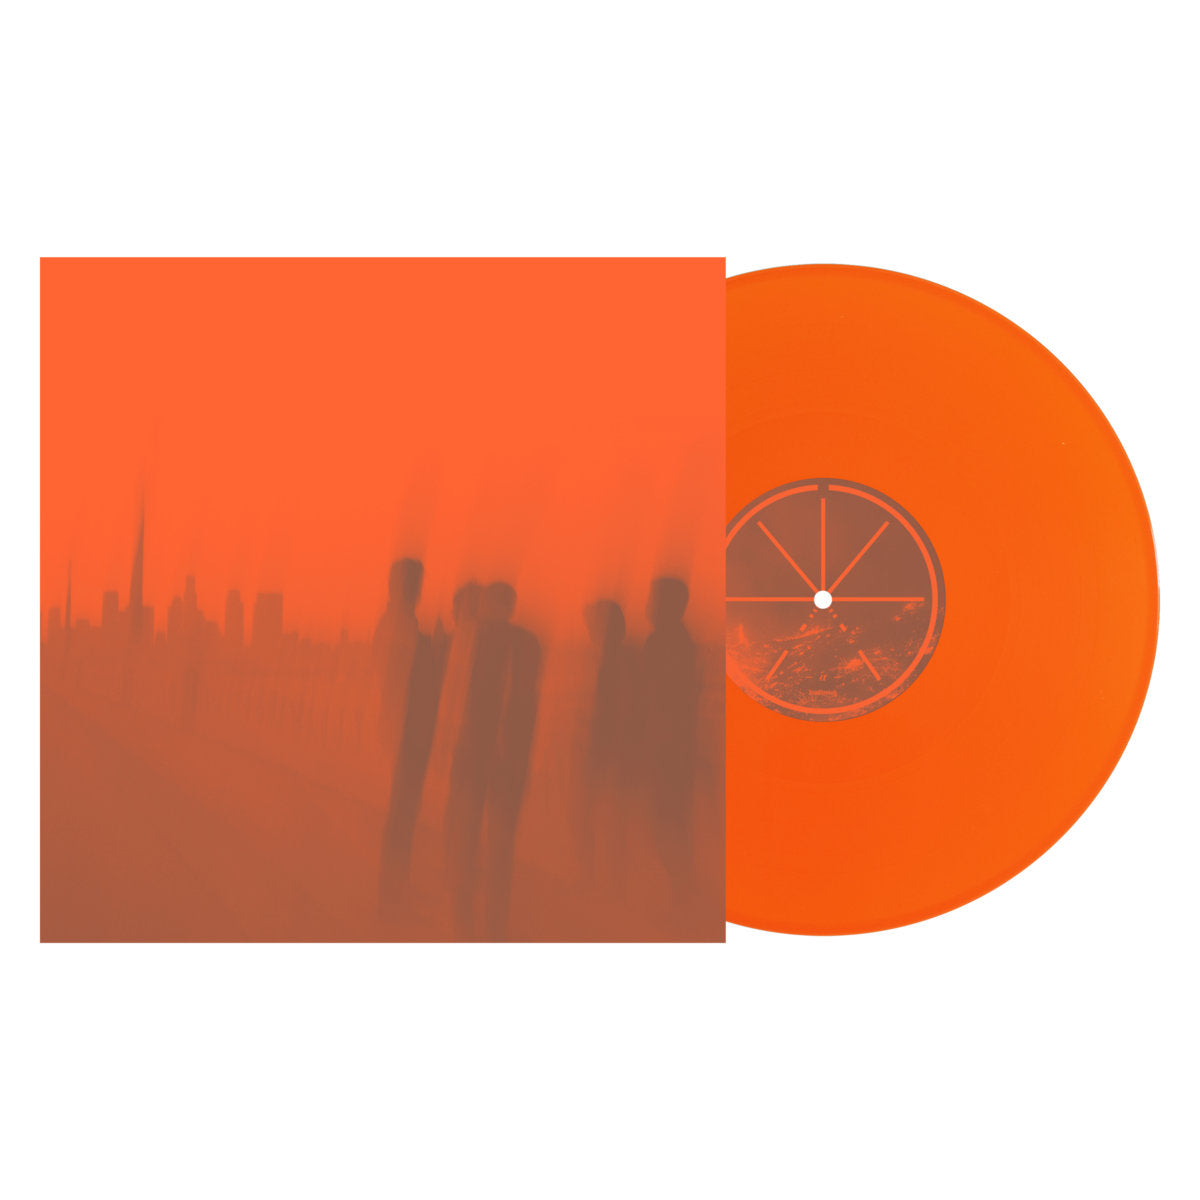 Touché Amoré - Is Survived By: Revived "Remixed / Remastered" (Neon Orange Vinyl)